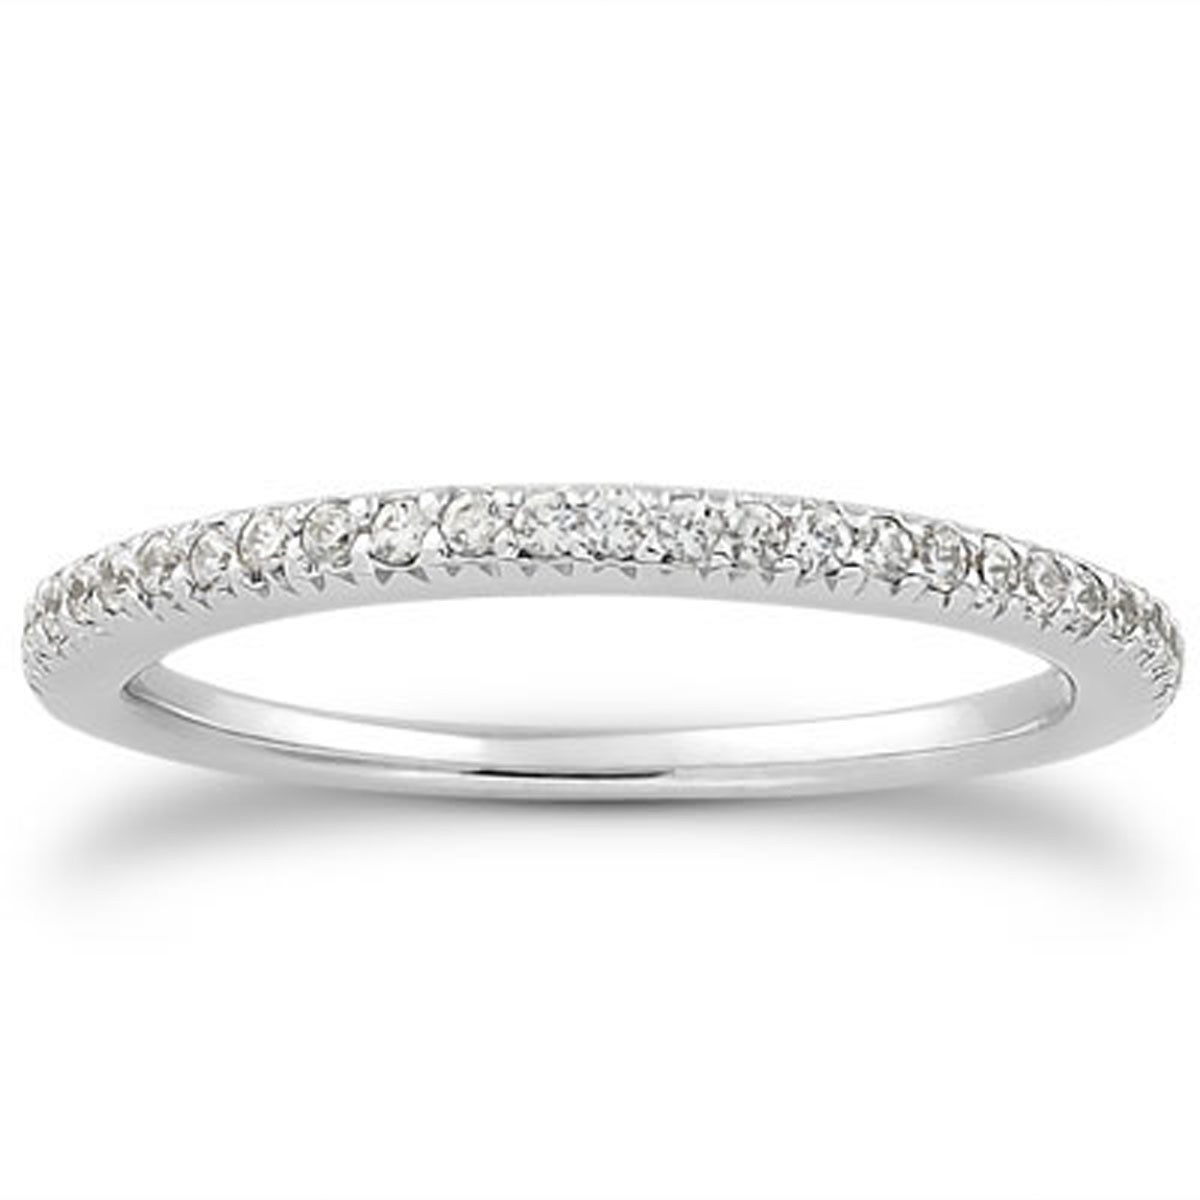 Pave Wedding Bands
 14K White Gold Fancy Engraved Pave Diamond Wedding Ring Band